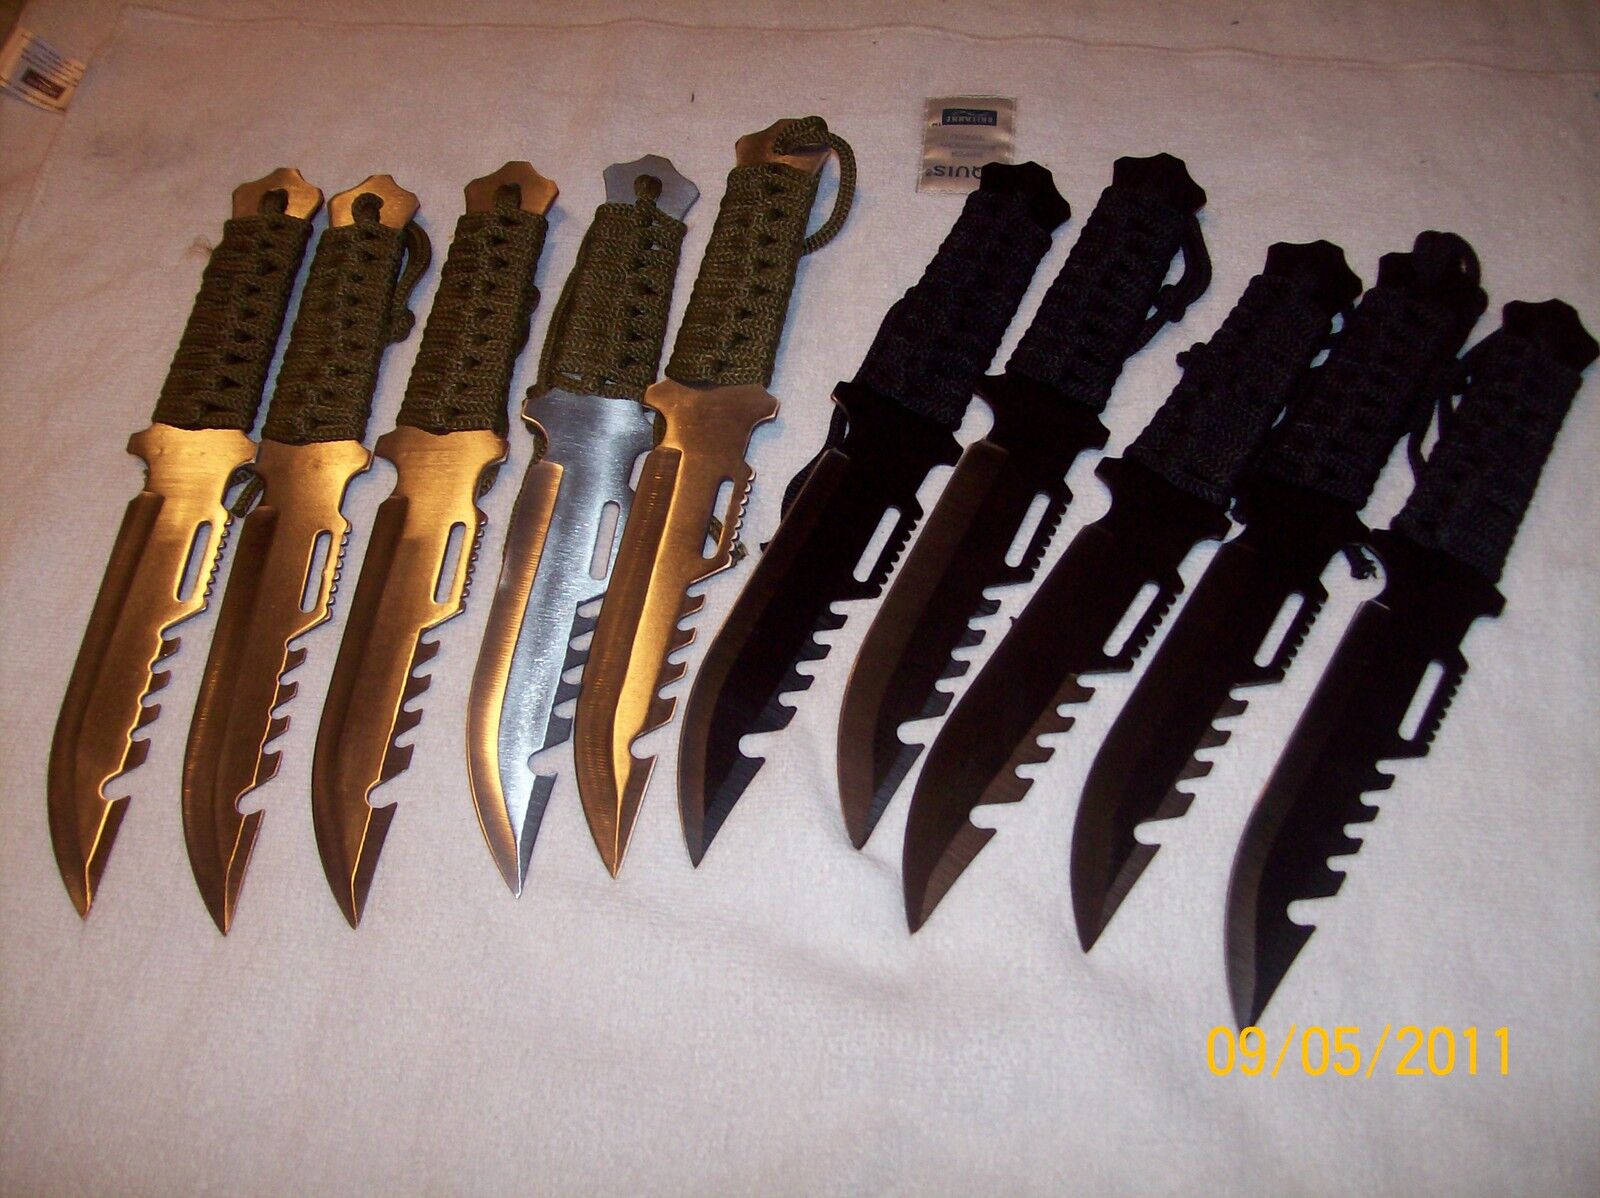 10 Hunting Lightweight Survival knives 5 BLACK 5 SILVER COLOR Wholesale Bug Out